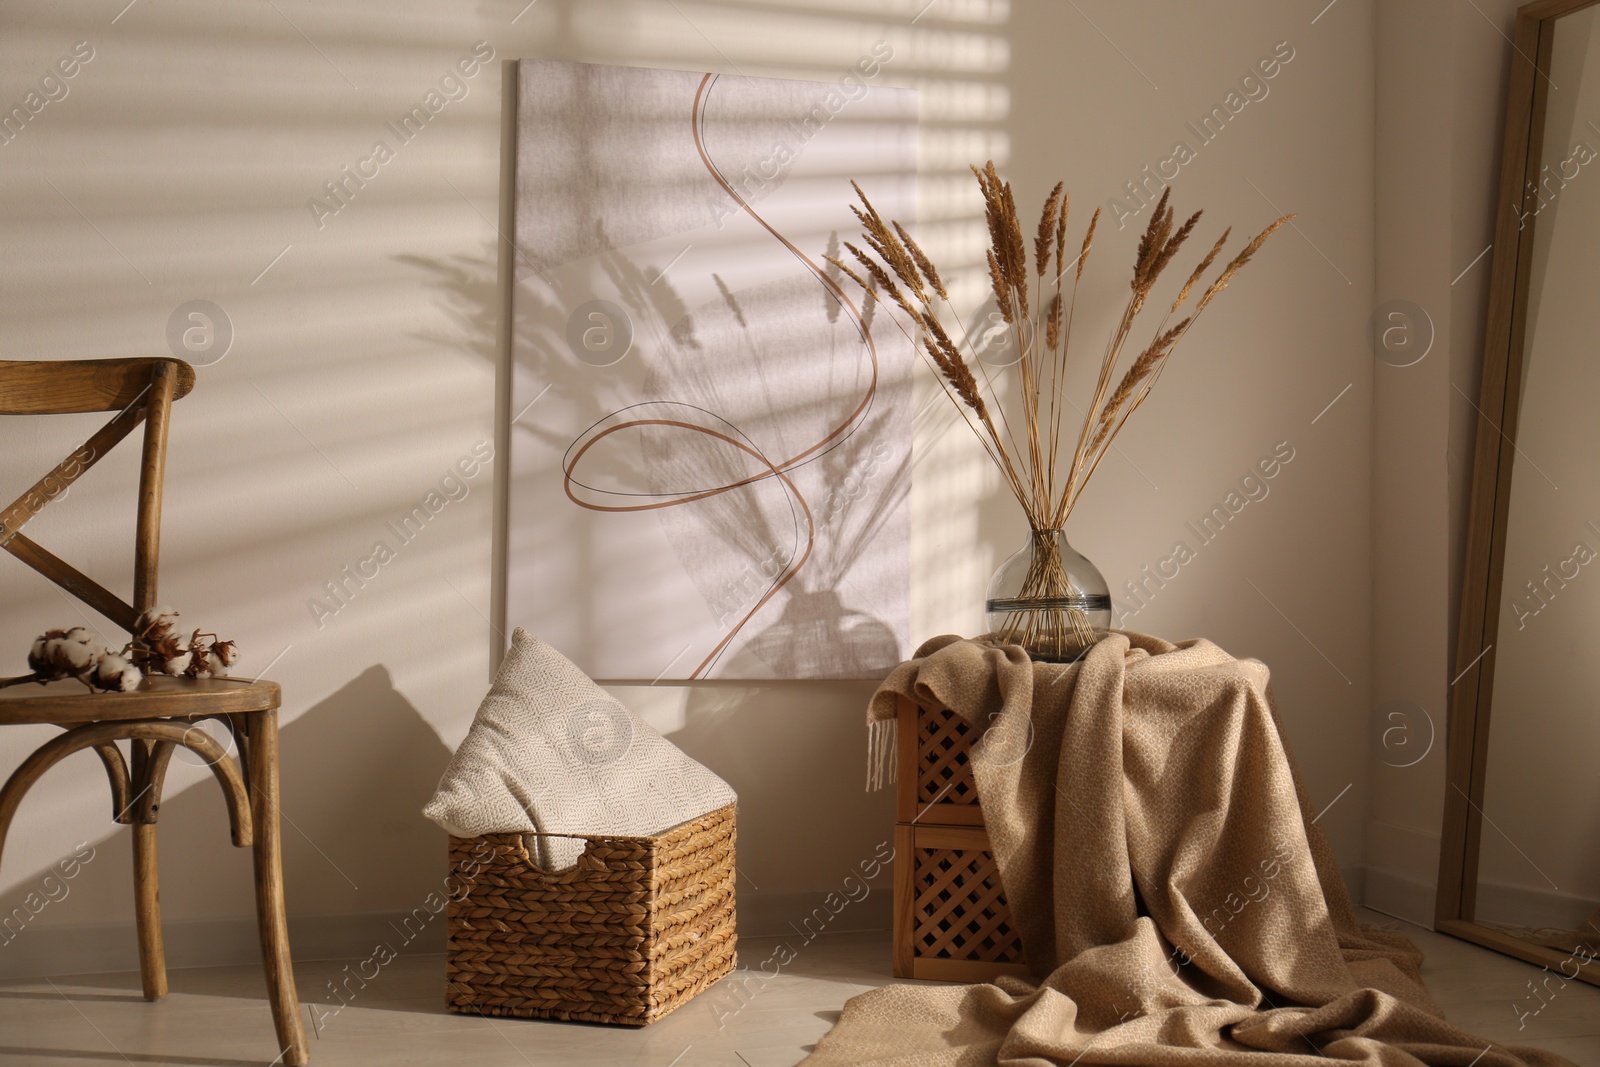 Photo of Vase with decorative dried plants and painting in stylish room interior